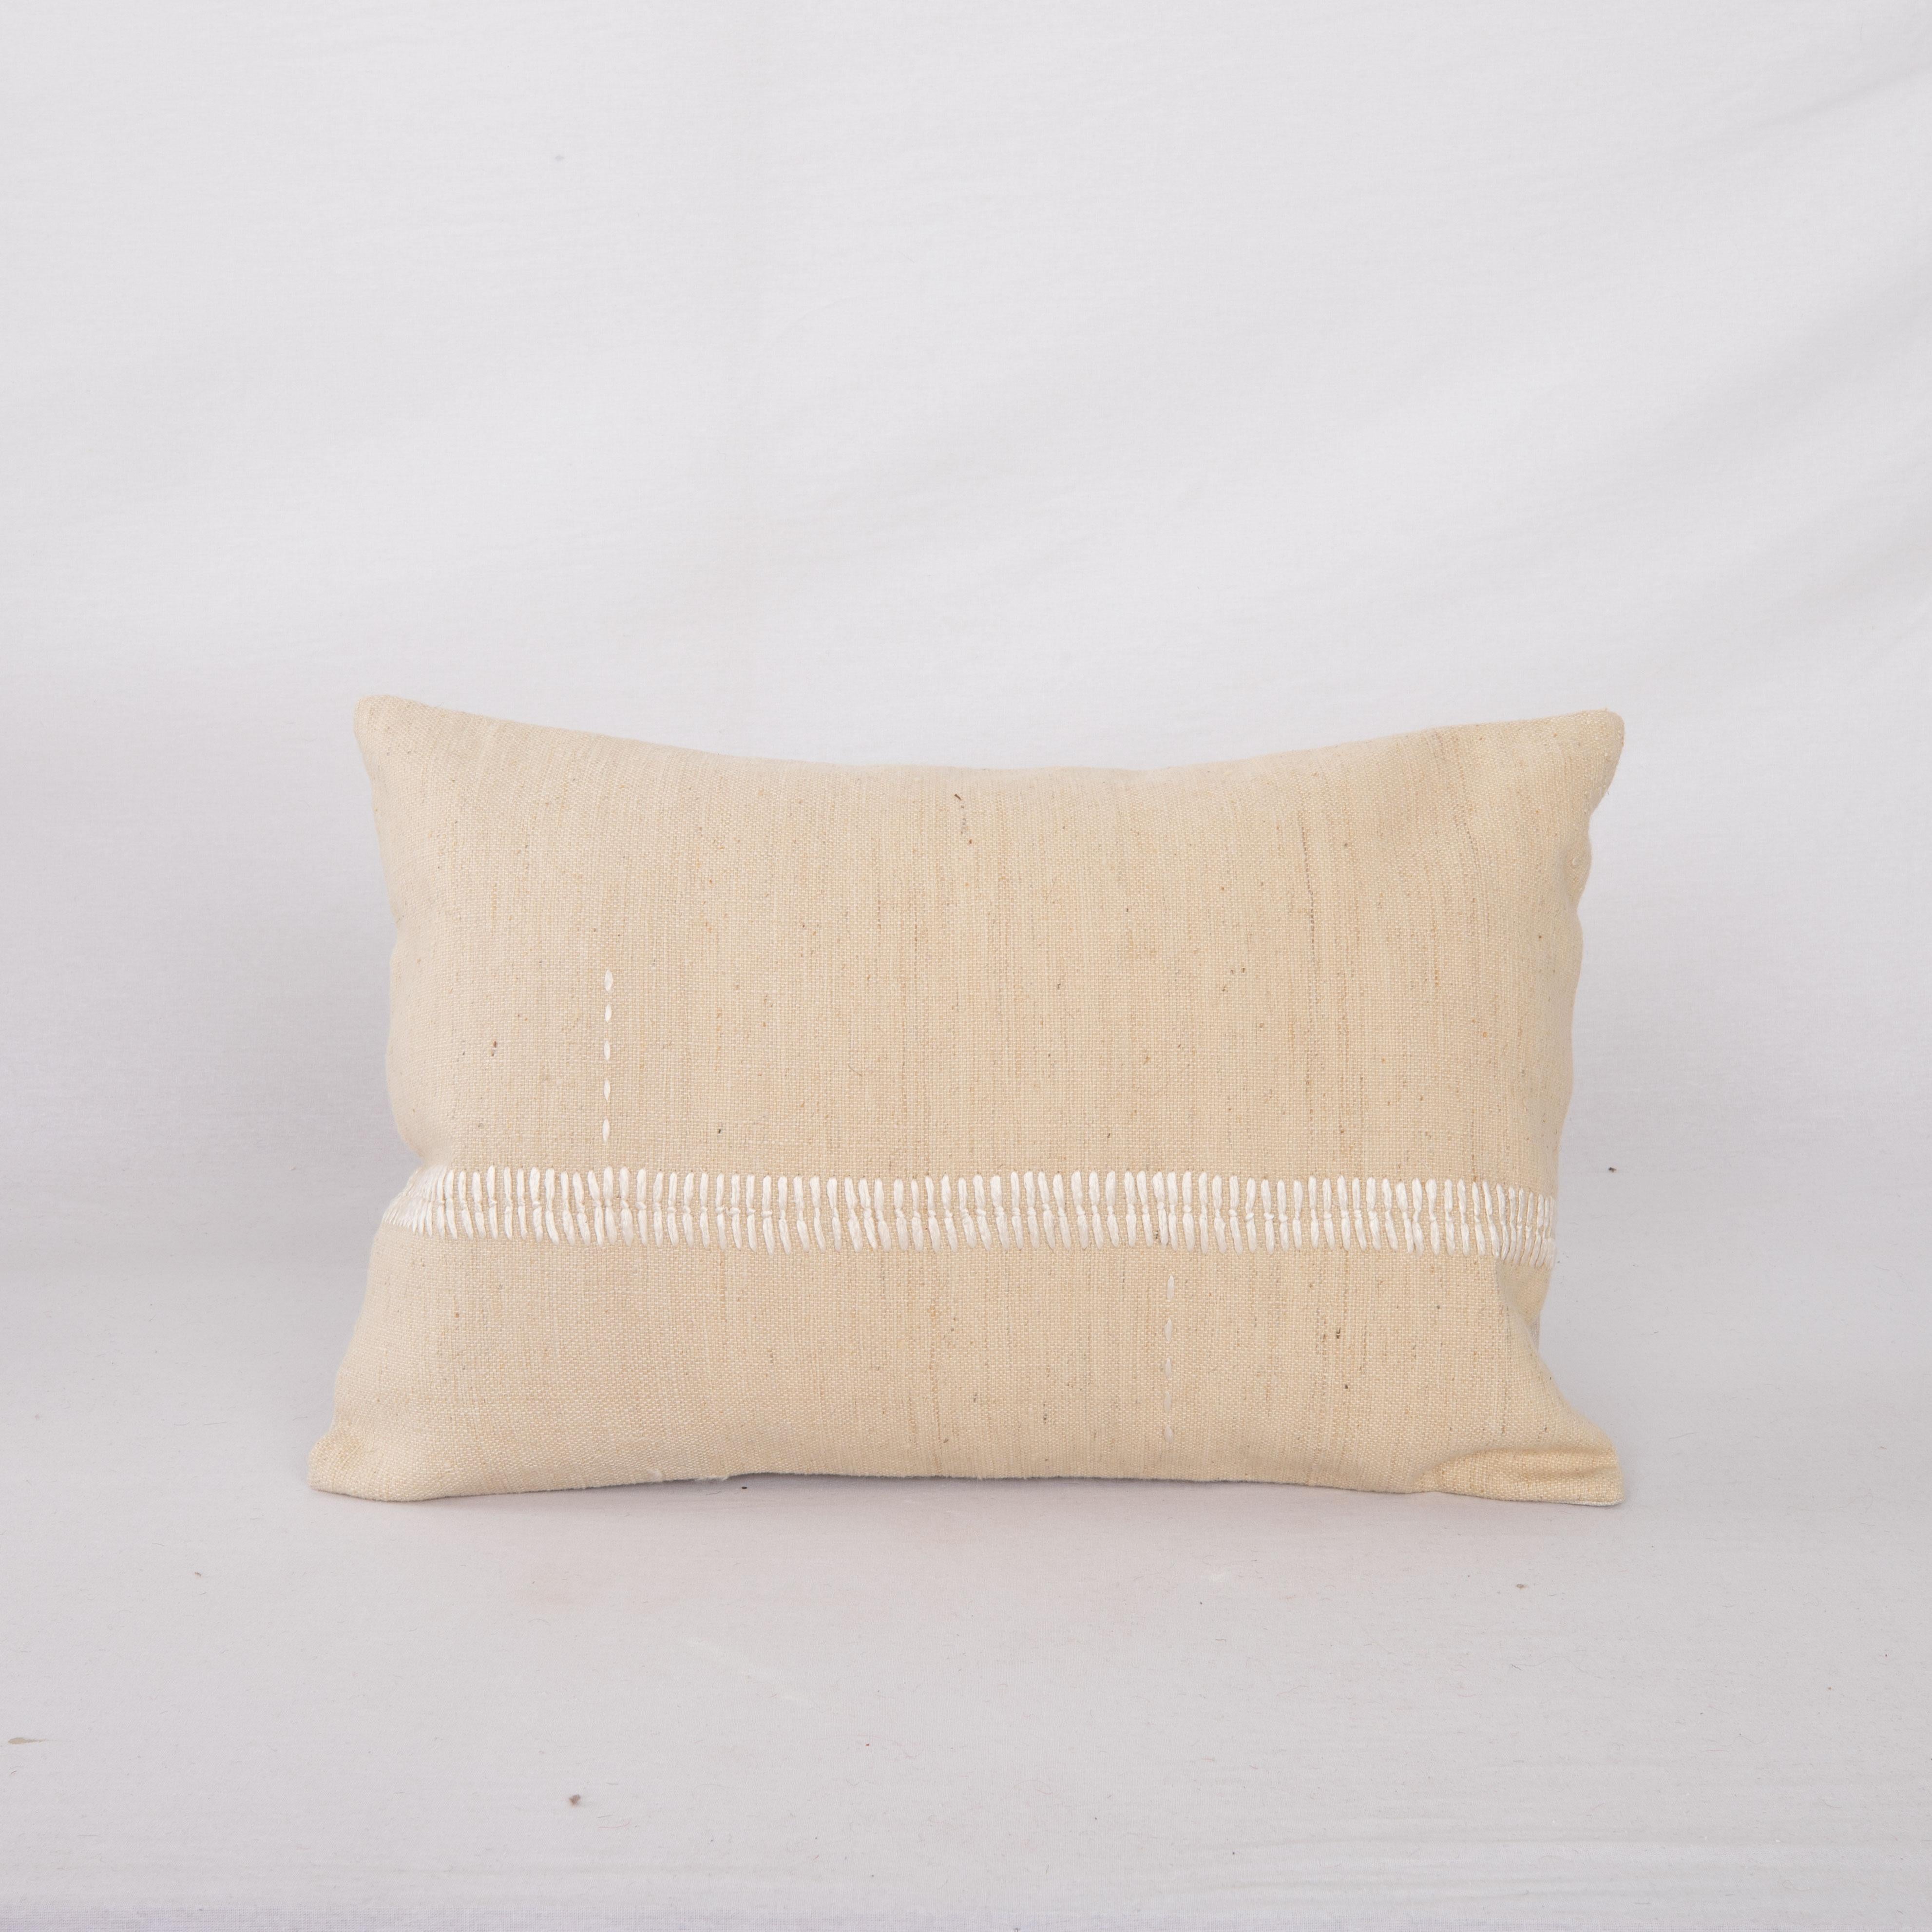 This pillow case is made from a vintage Anatolian Cotton Cover. Hand done silk stitching on it is our addition to the piece to give it a fine detail.

It does not come with inserts.
linen in the back.
Zipper closure.
Dry cleaning is reccommended.
